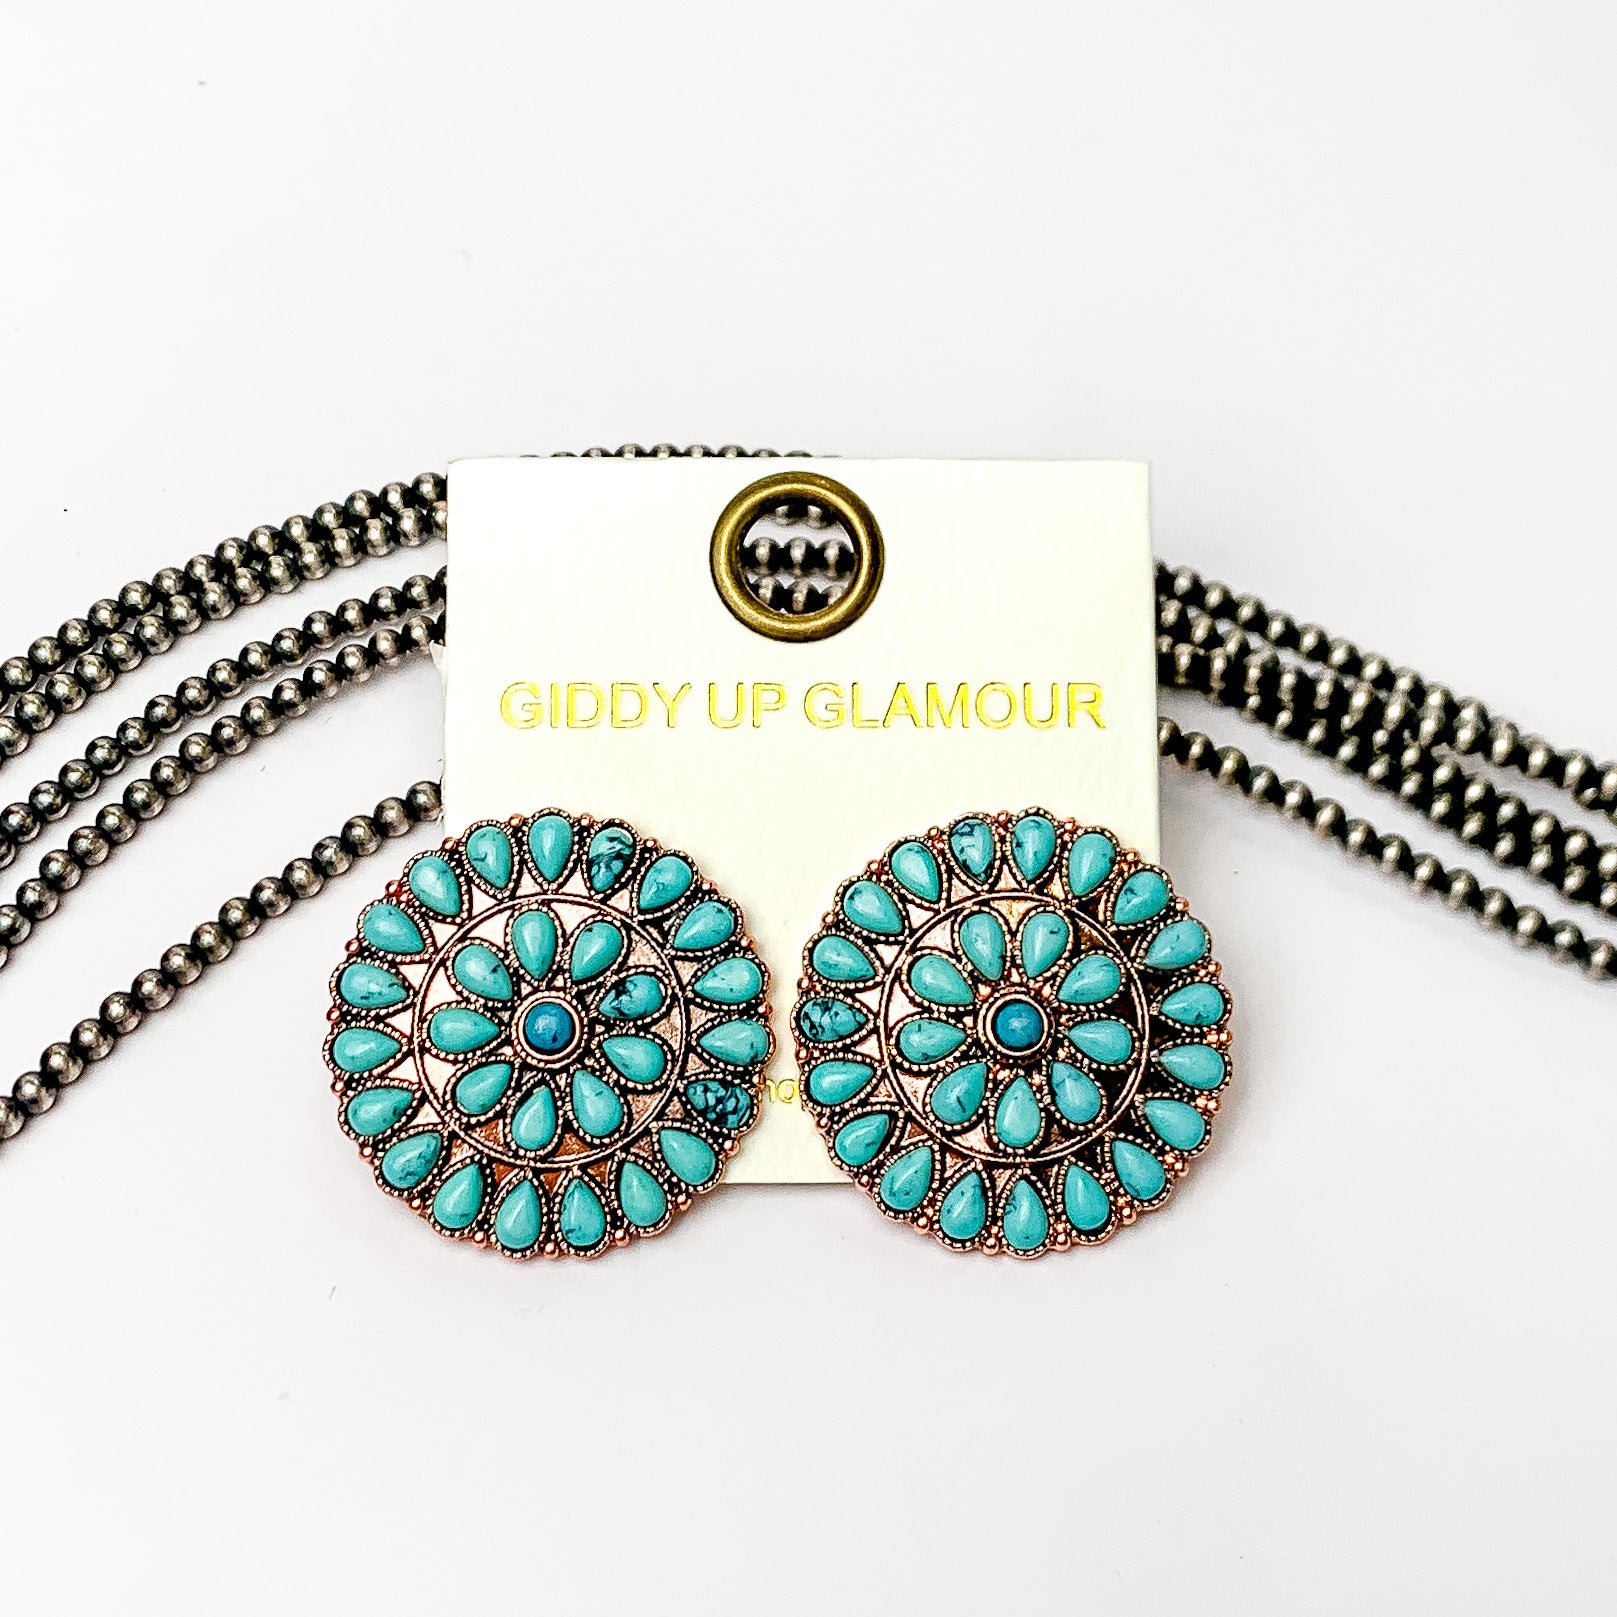 Copper Tone Circle Cluster Stud Earrings with Turquoise Stones. Pictured on a white background with beads through it.